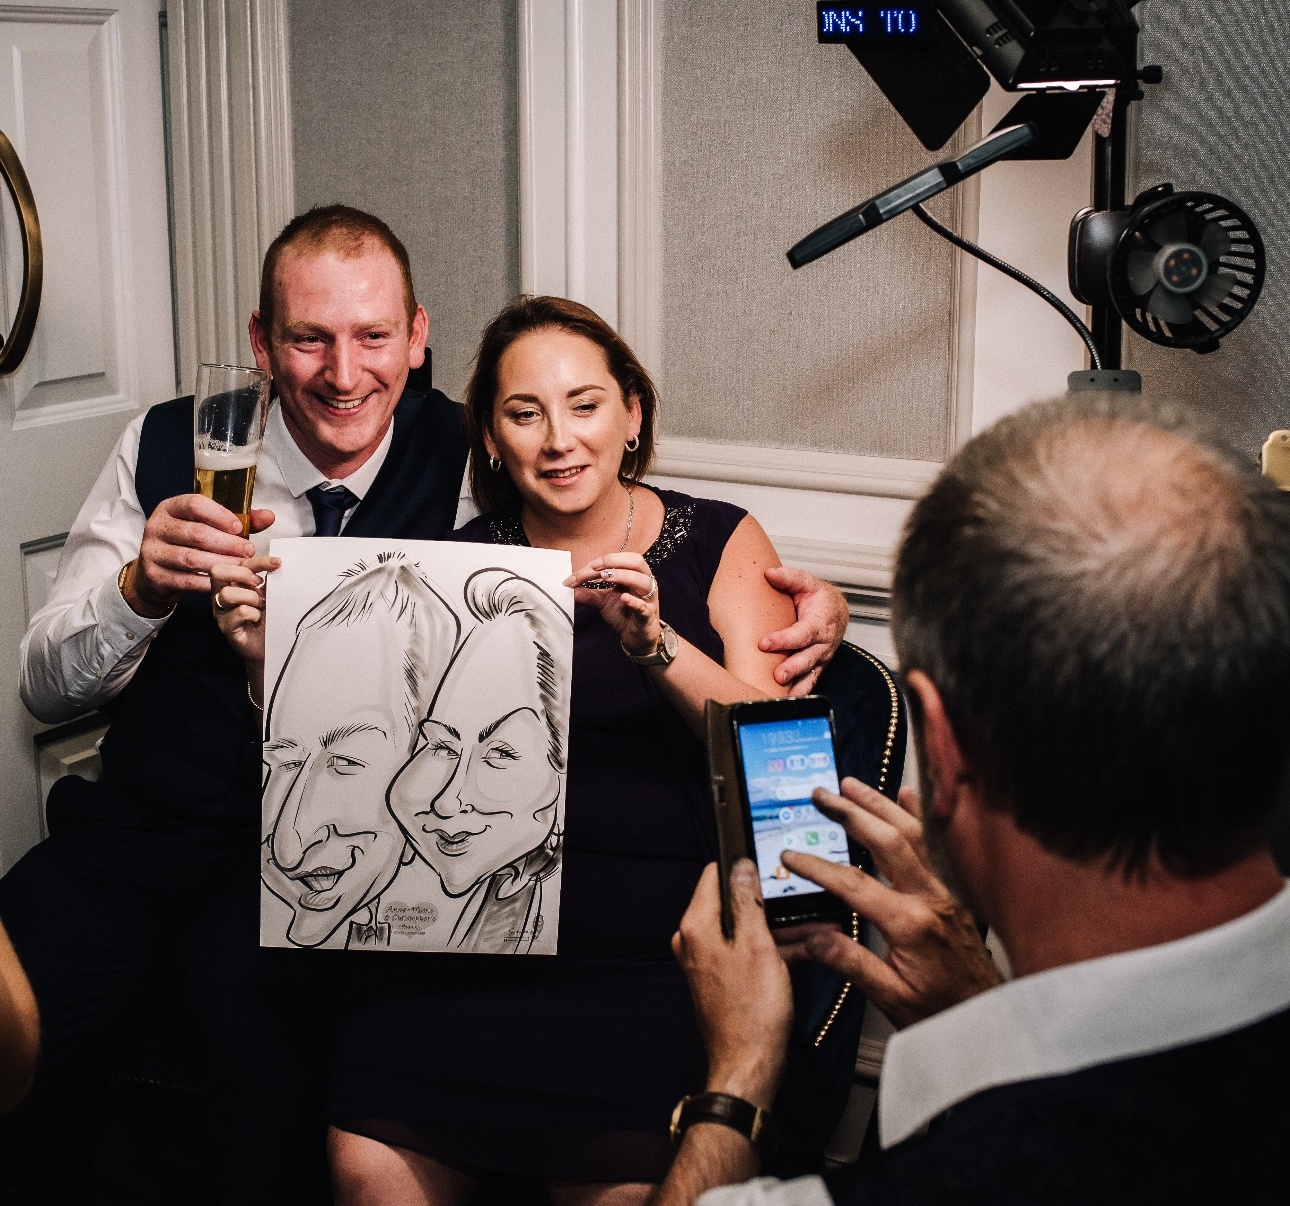 Anne-Marie and Christopher pose with their caricature from Tony's Toons Caricatures